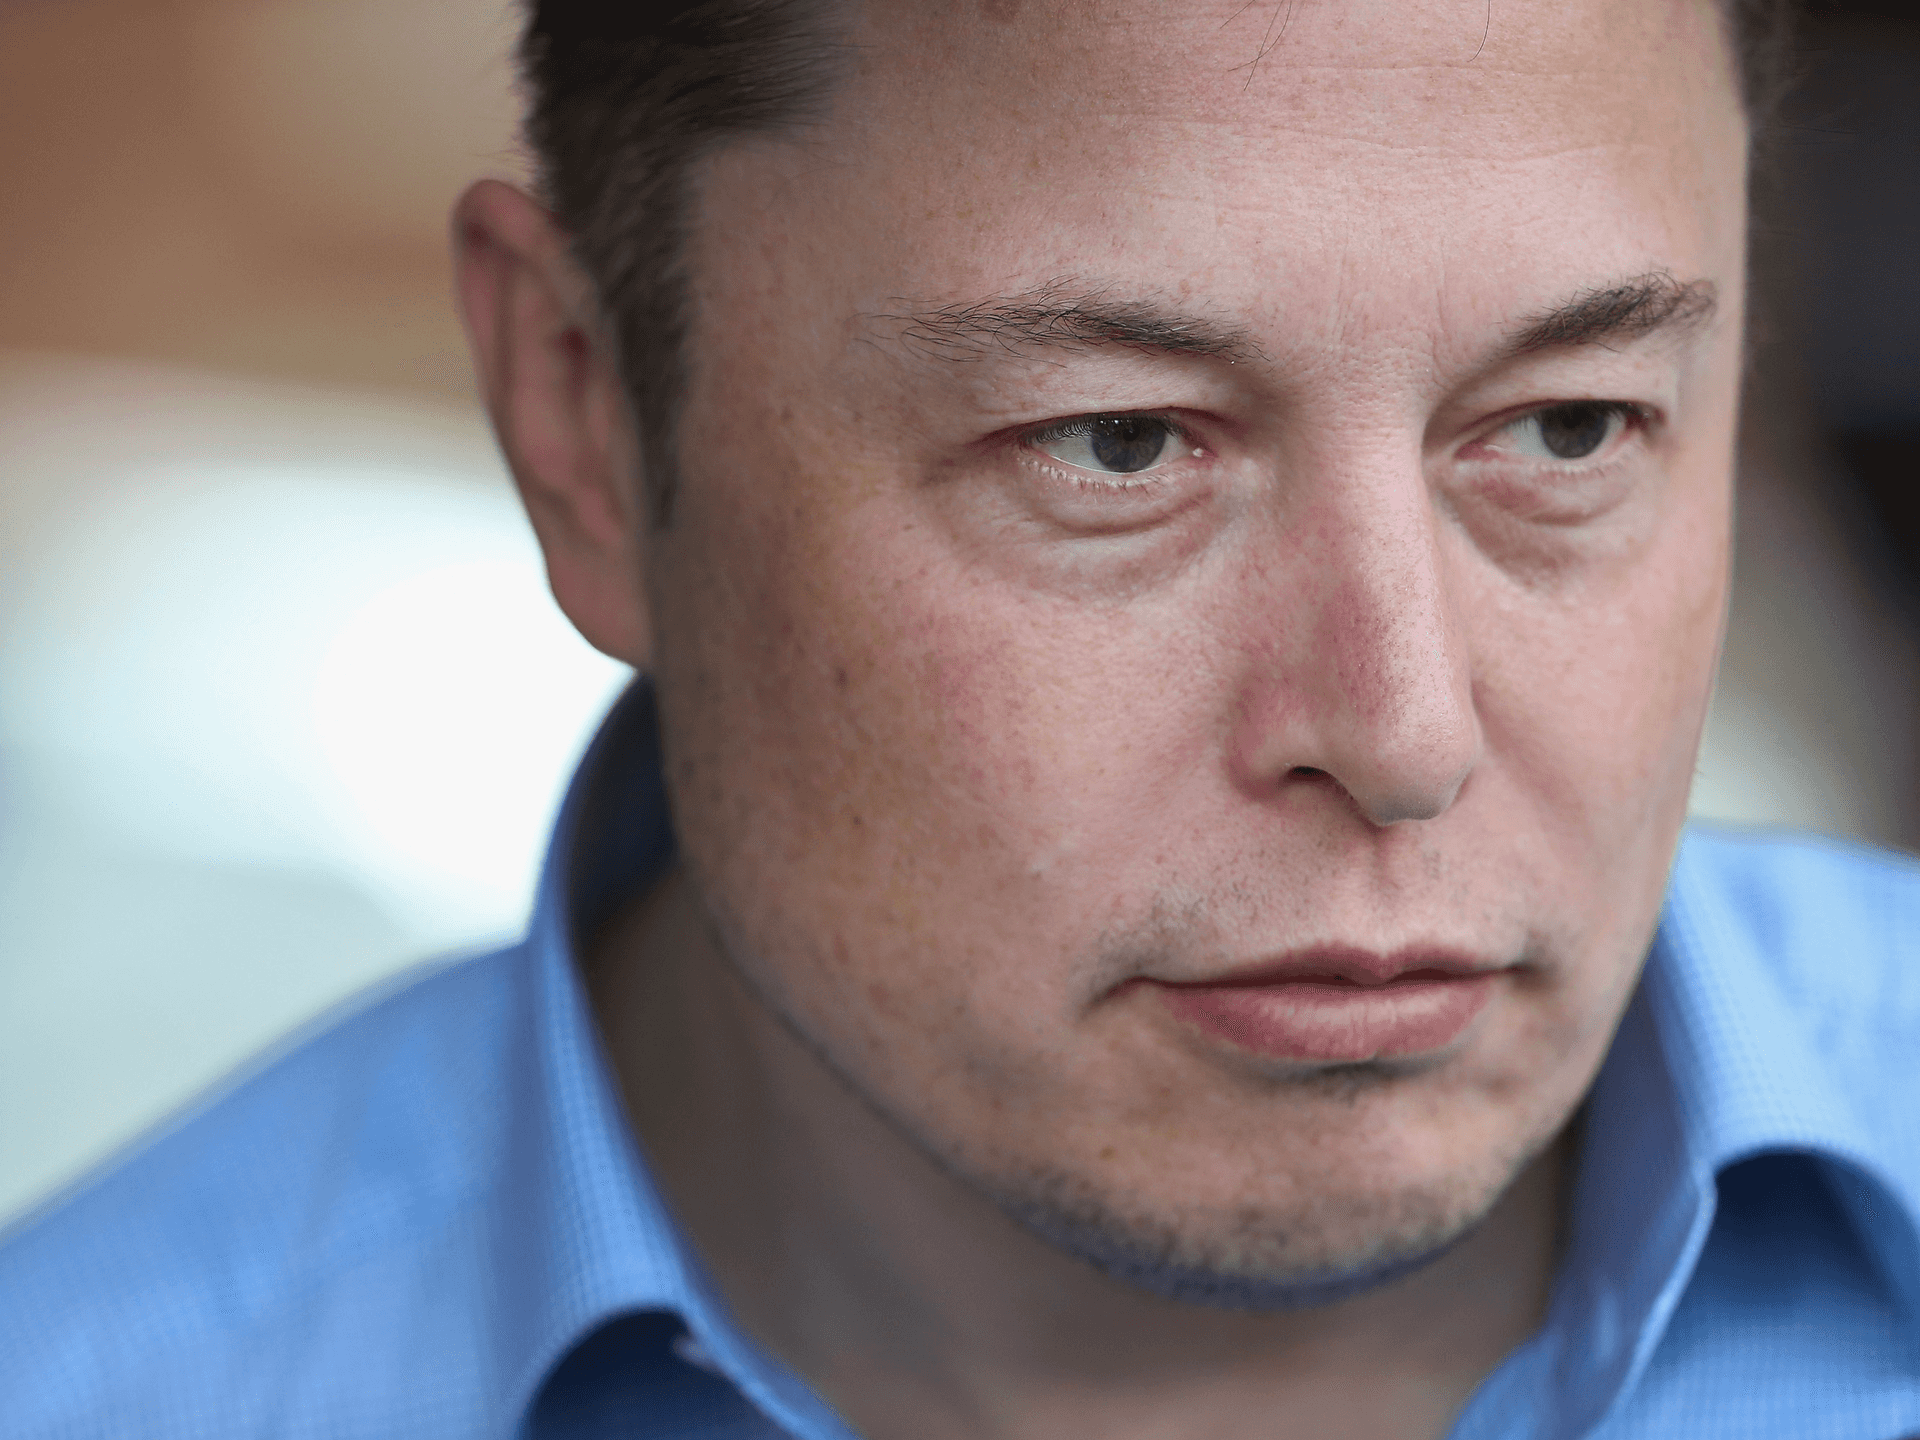 Elon Musk Is Looking At The Camera